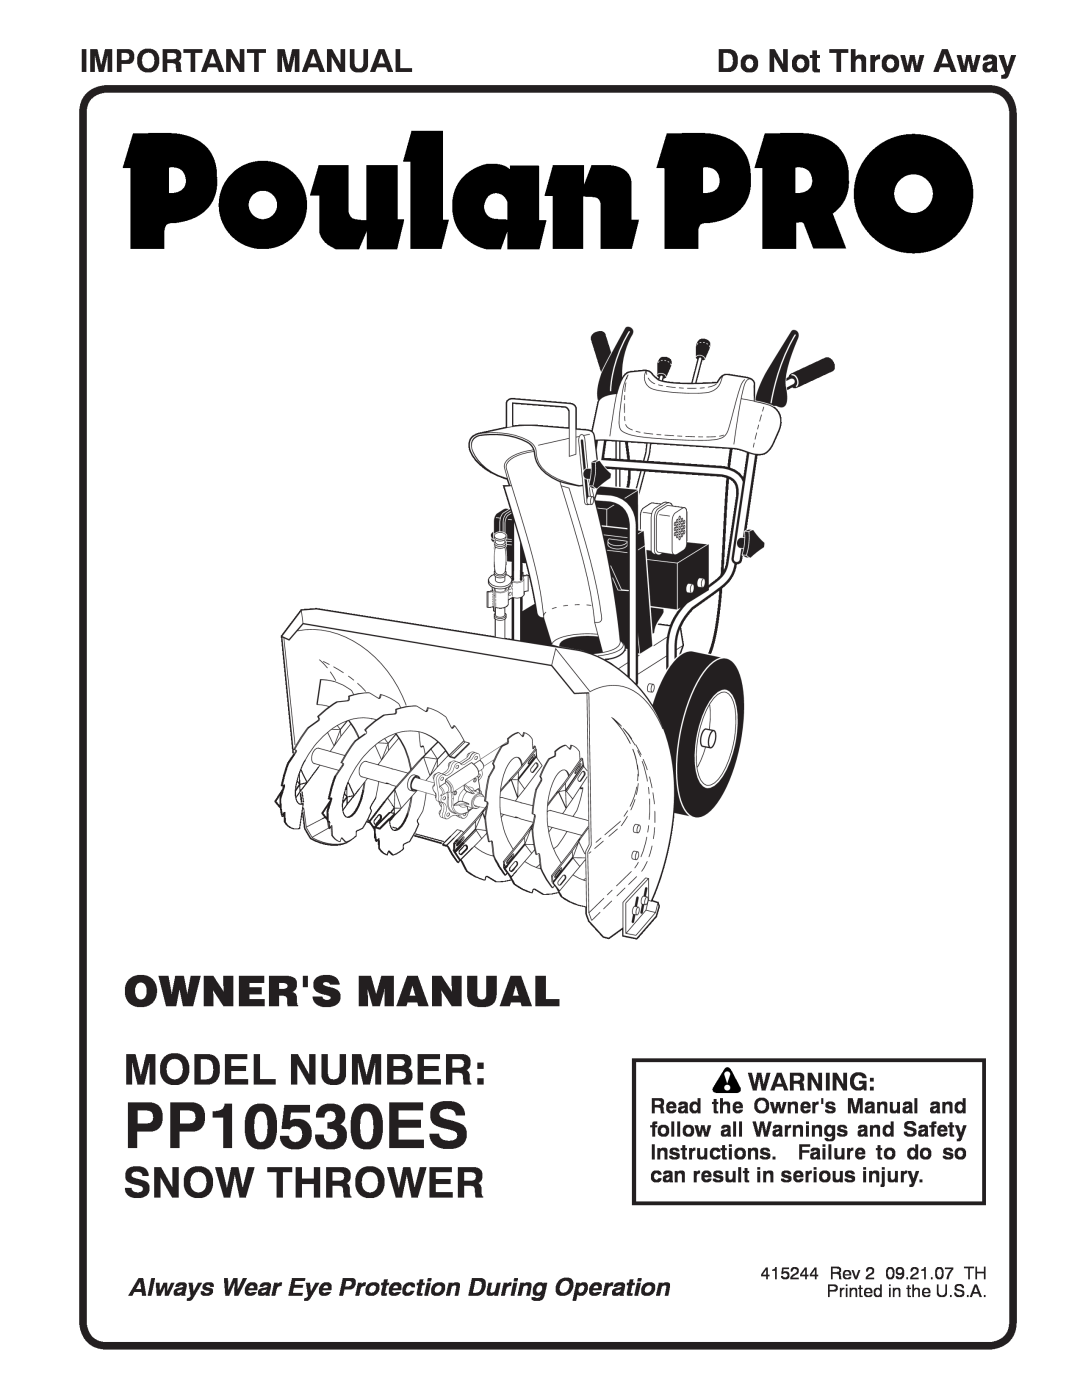 Poulan 96192001801 owner manual Owners Manual Model Number, Snow Thrower, Important Manual, PP10530ES, Do Not Throw Away 